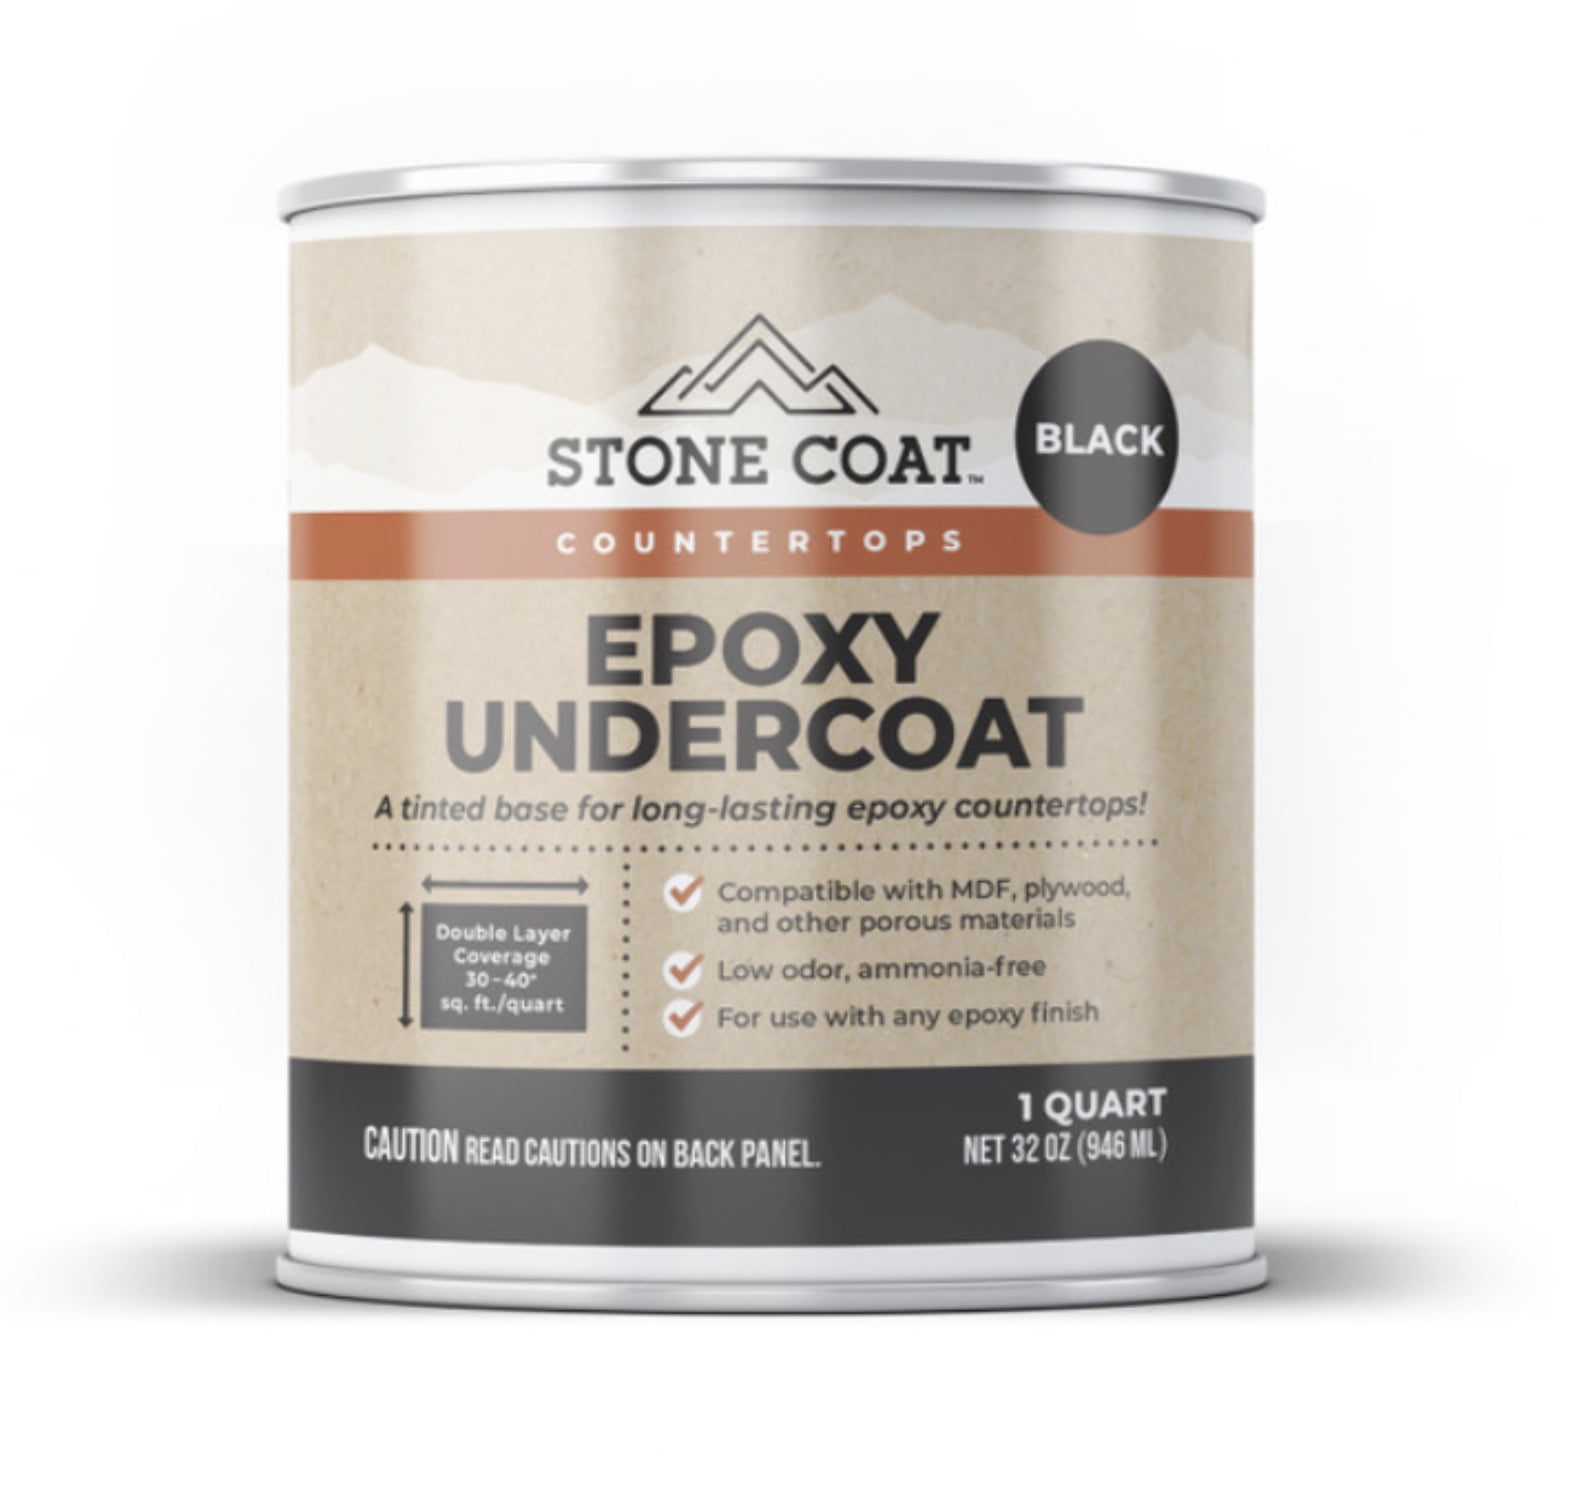 Stone Coat Countertops Black Epoxy Undercoat Â Epoxy Paint and Primer Mix for Coating MDF, Plywood, and Porous Materials!